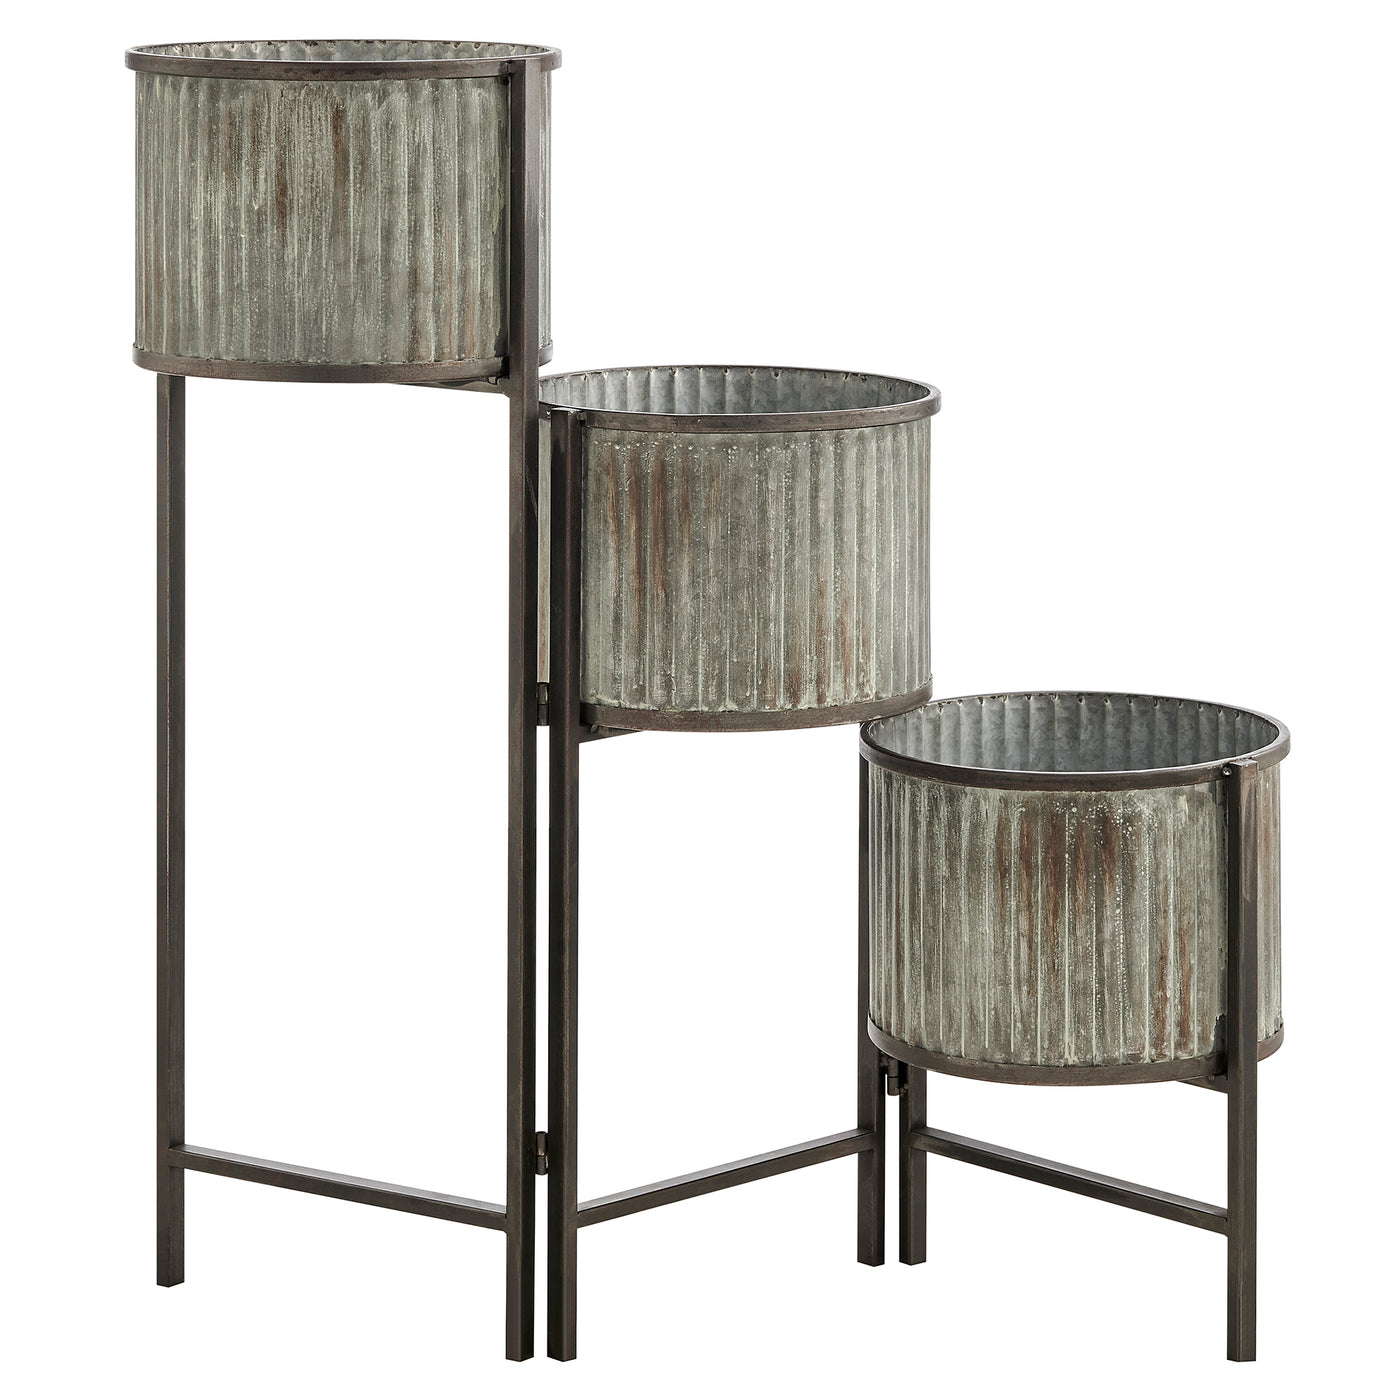 FirsTime & Co. Silver Jasper Outdoor Planter 3-Piece Set, Farmhouse Style, Made of Metal